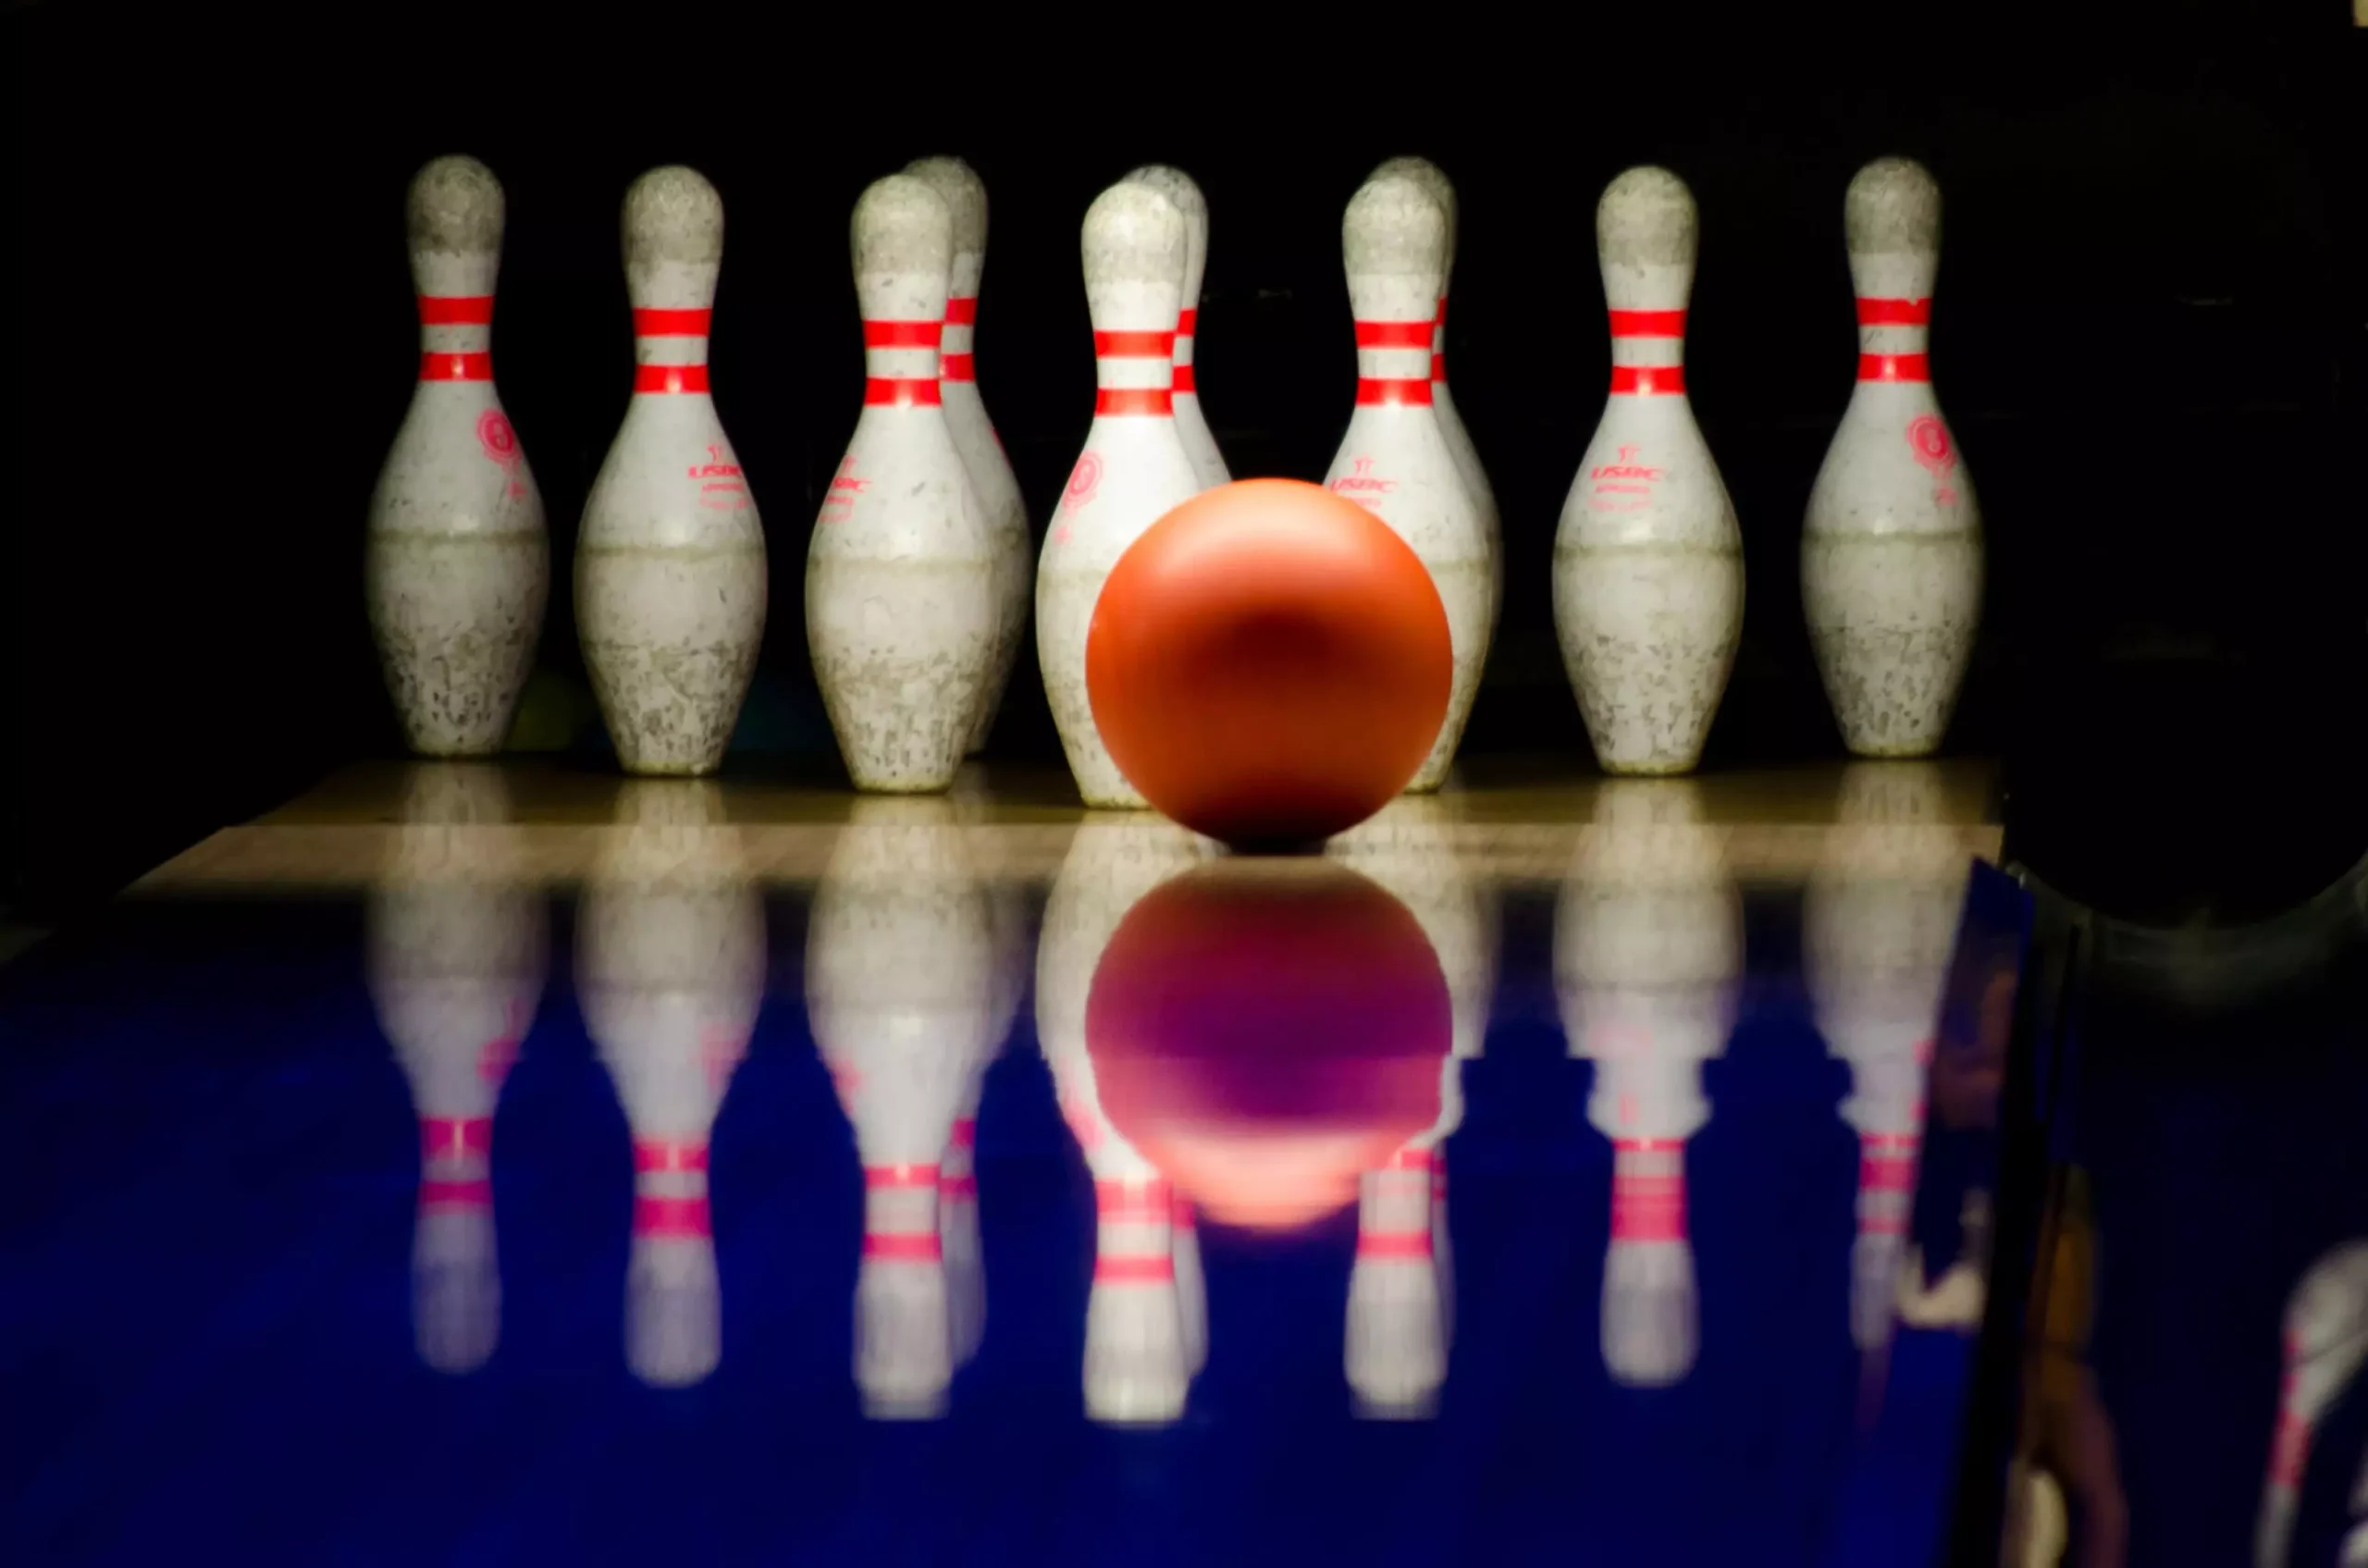 100 Bowling Team Names That Are Great